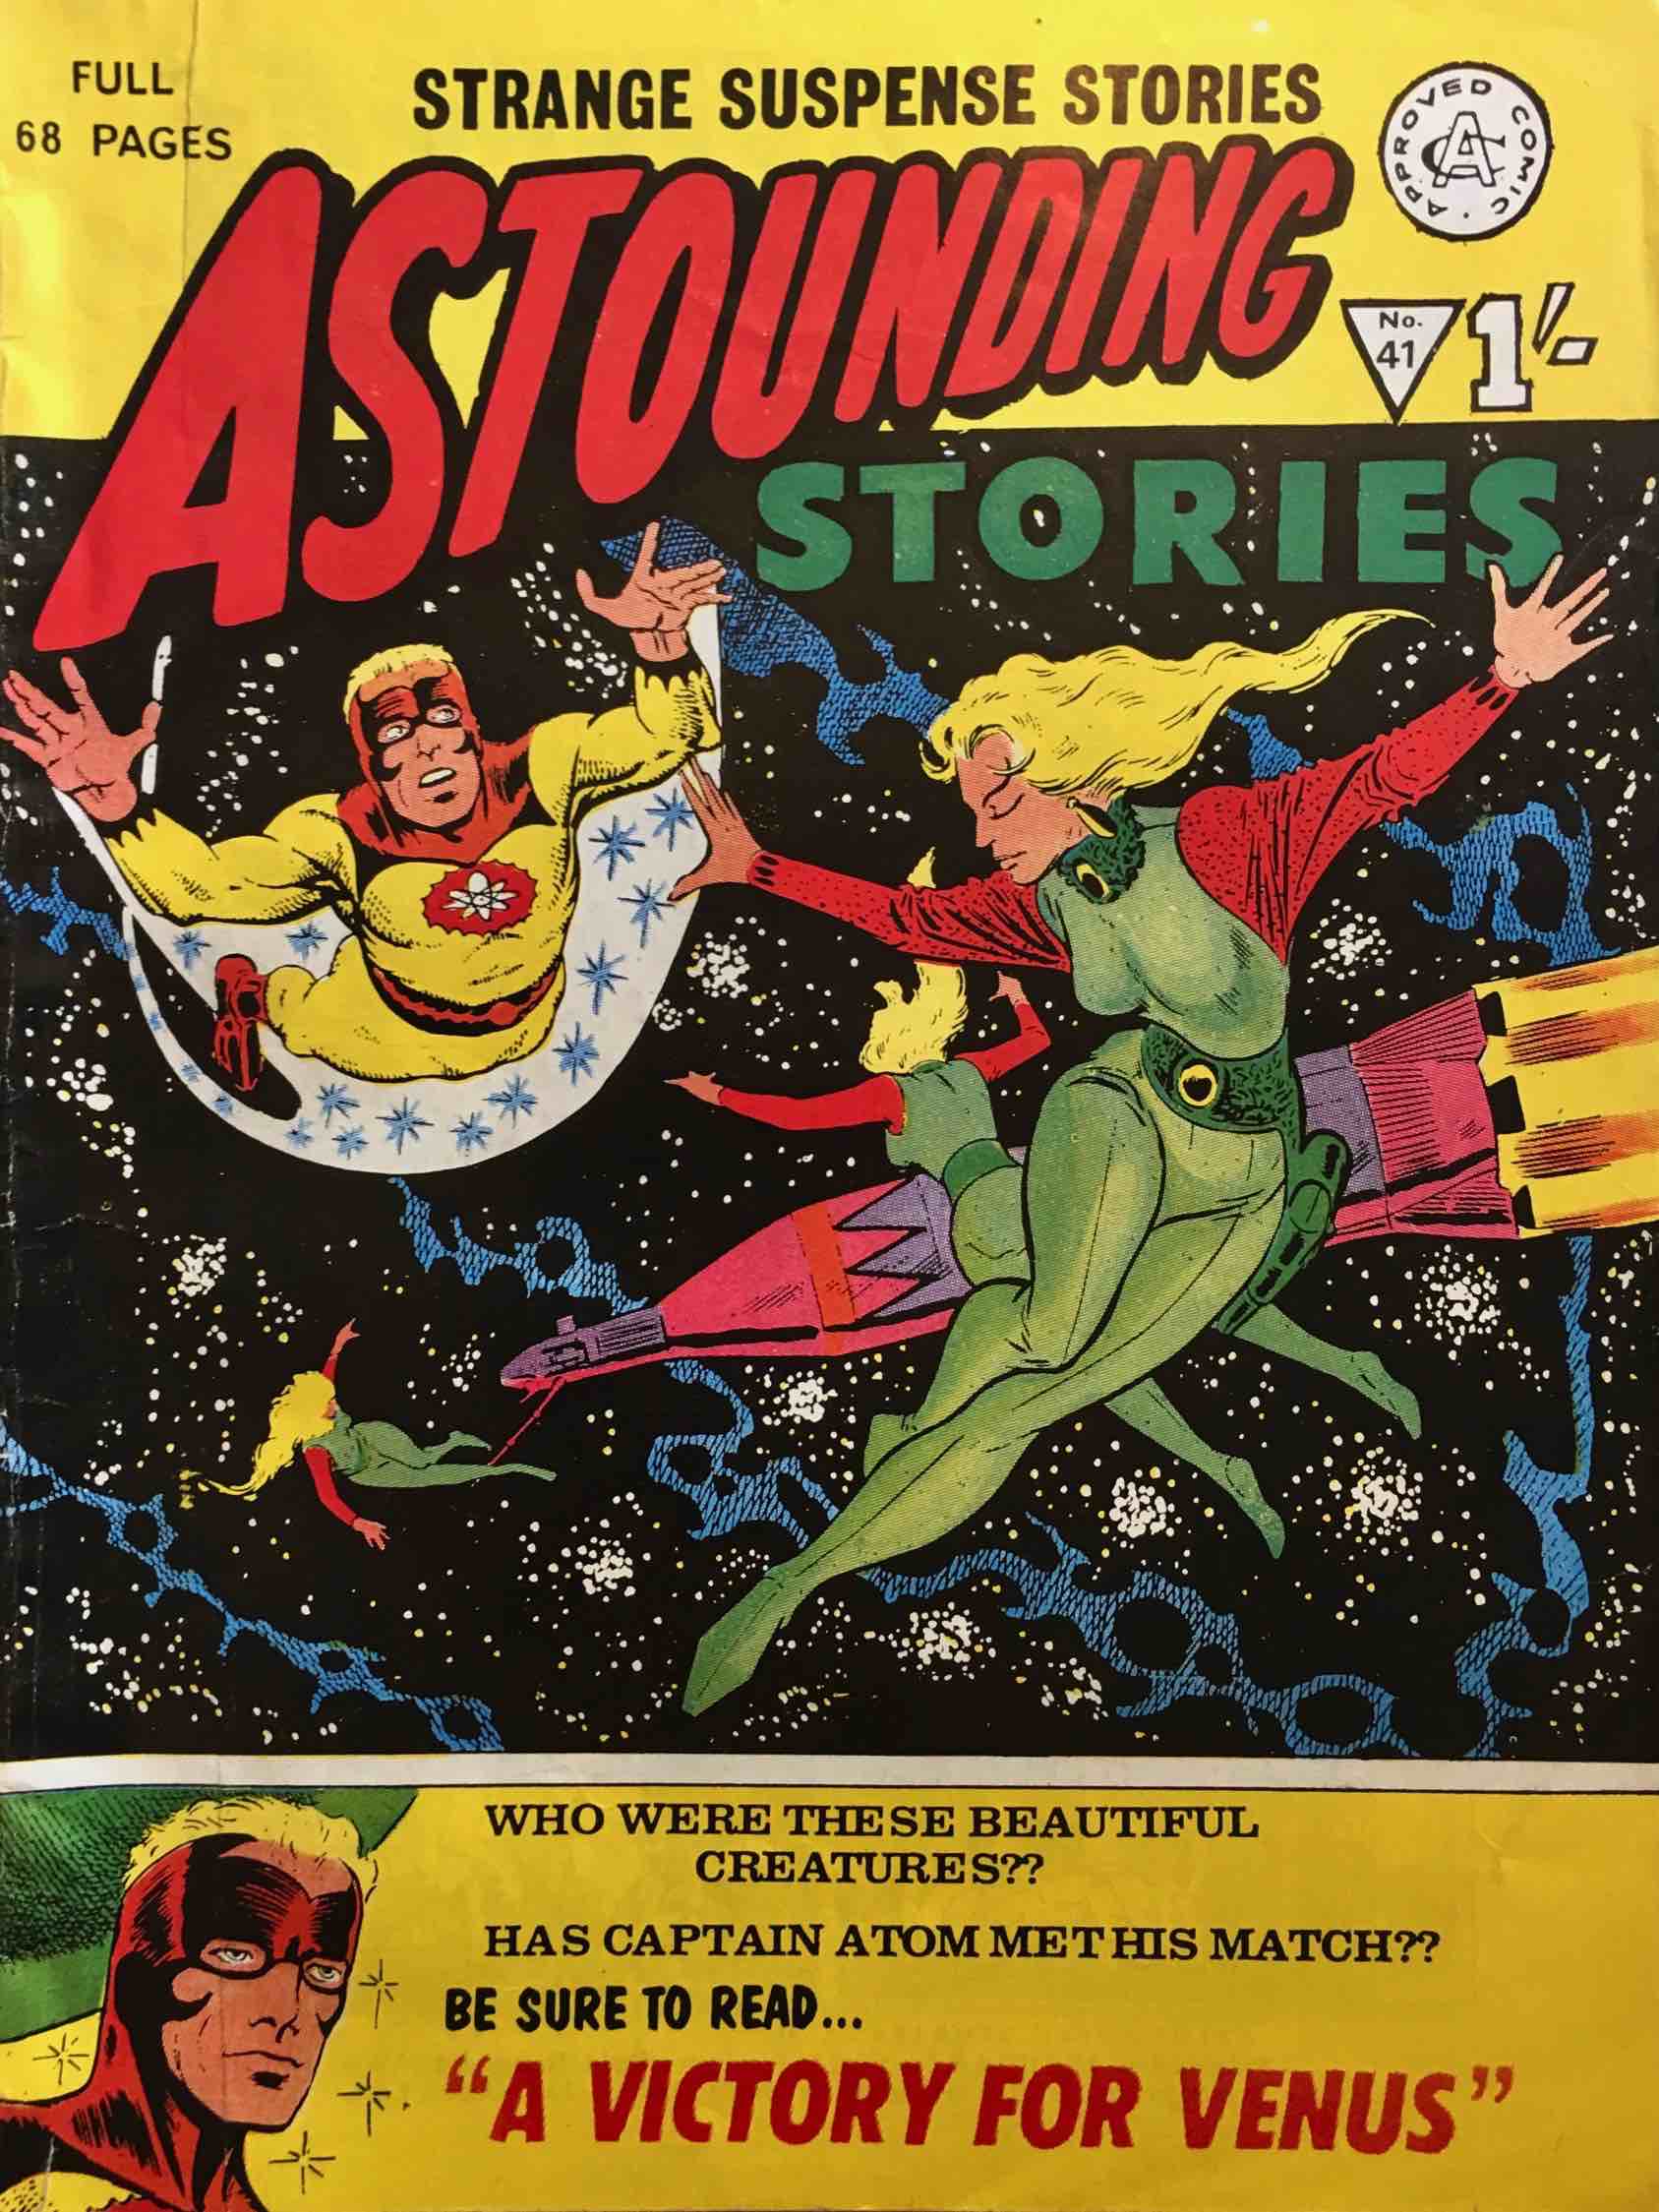 Book Cover For Astounding Stories 41